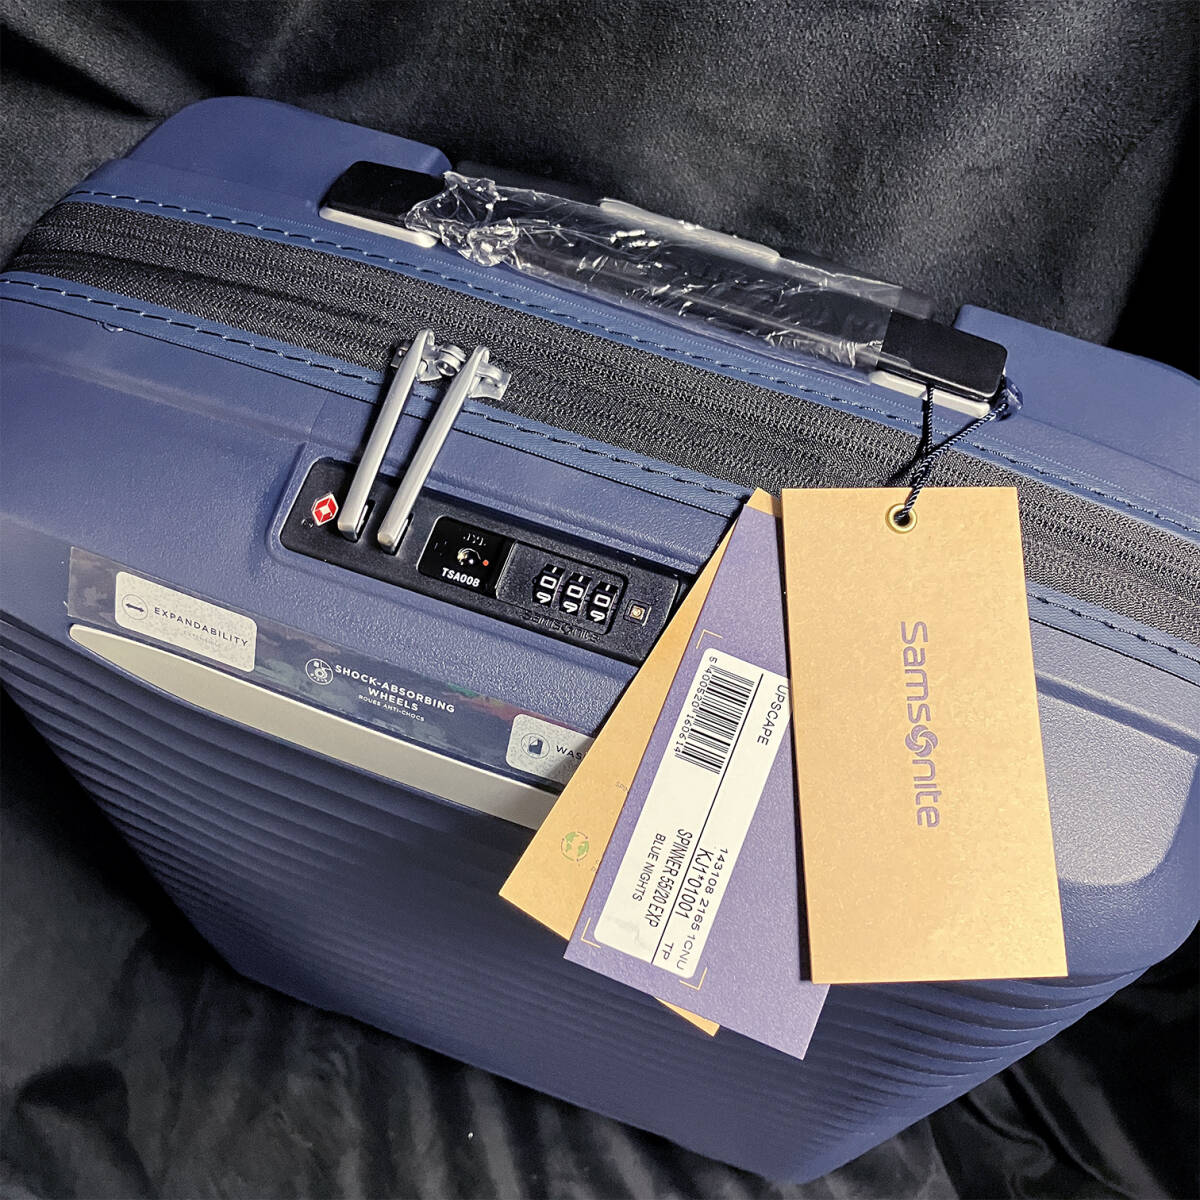 Samsonite Samsonite suitcase super light weight 2.3kg UPSCAPE Spinner 55 up scape spinner 55 total size 115cm machine inside bring-your-own possible unused goods 